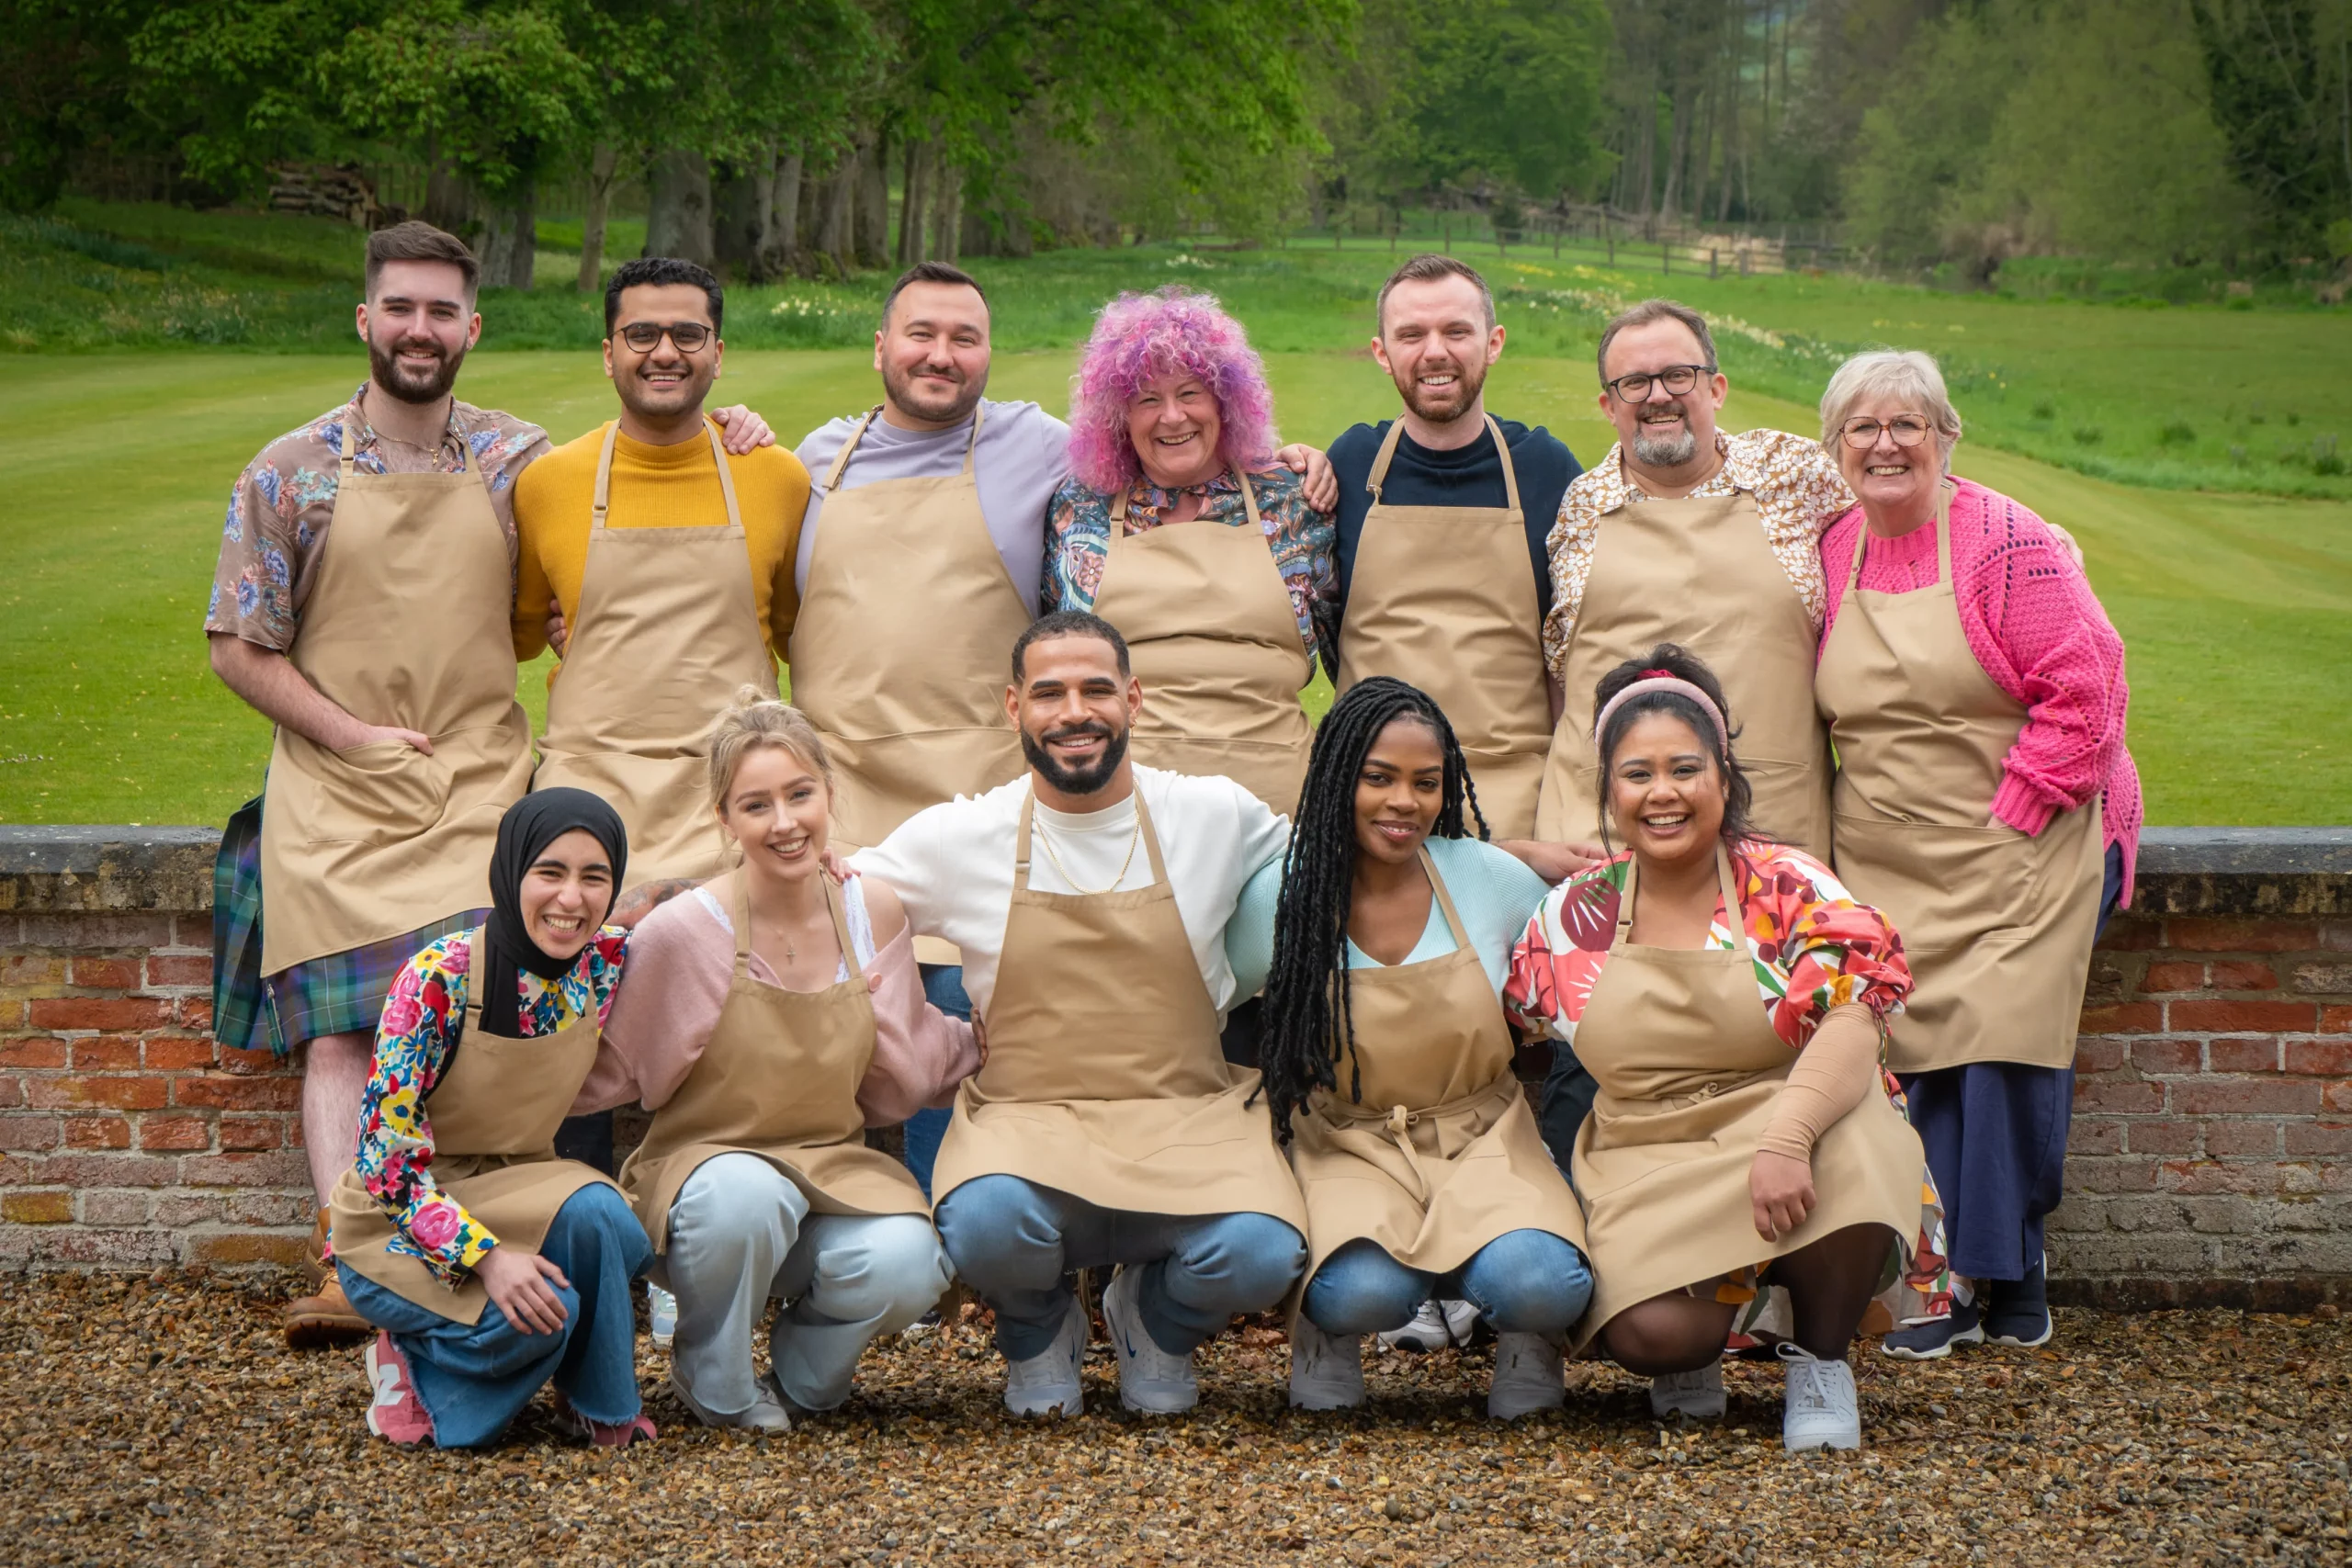 The Great British Bake Off Season 13 Episode 11 Release Date